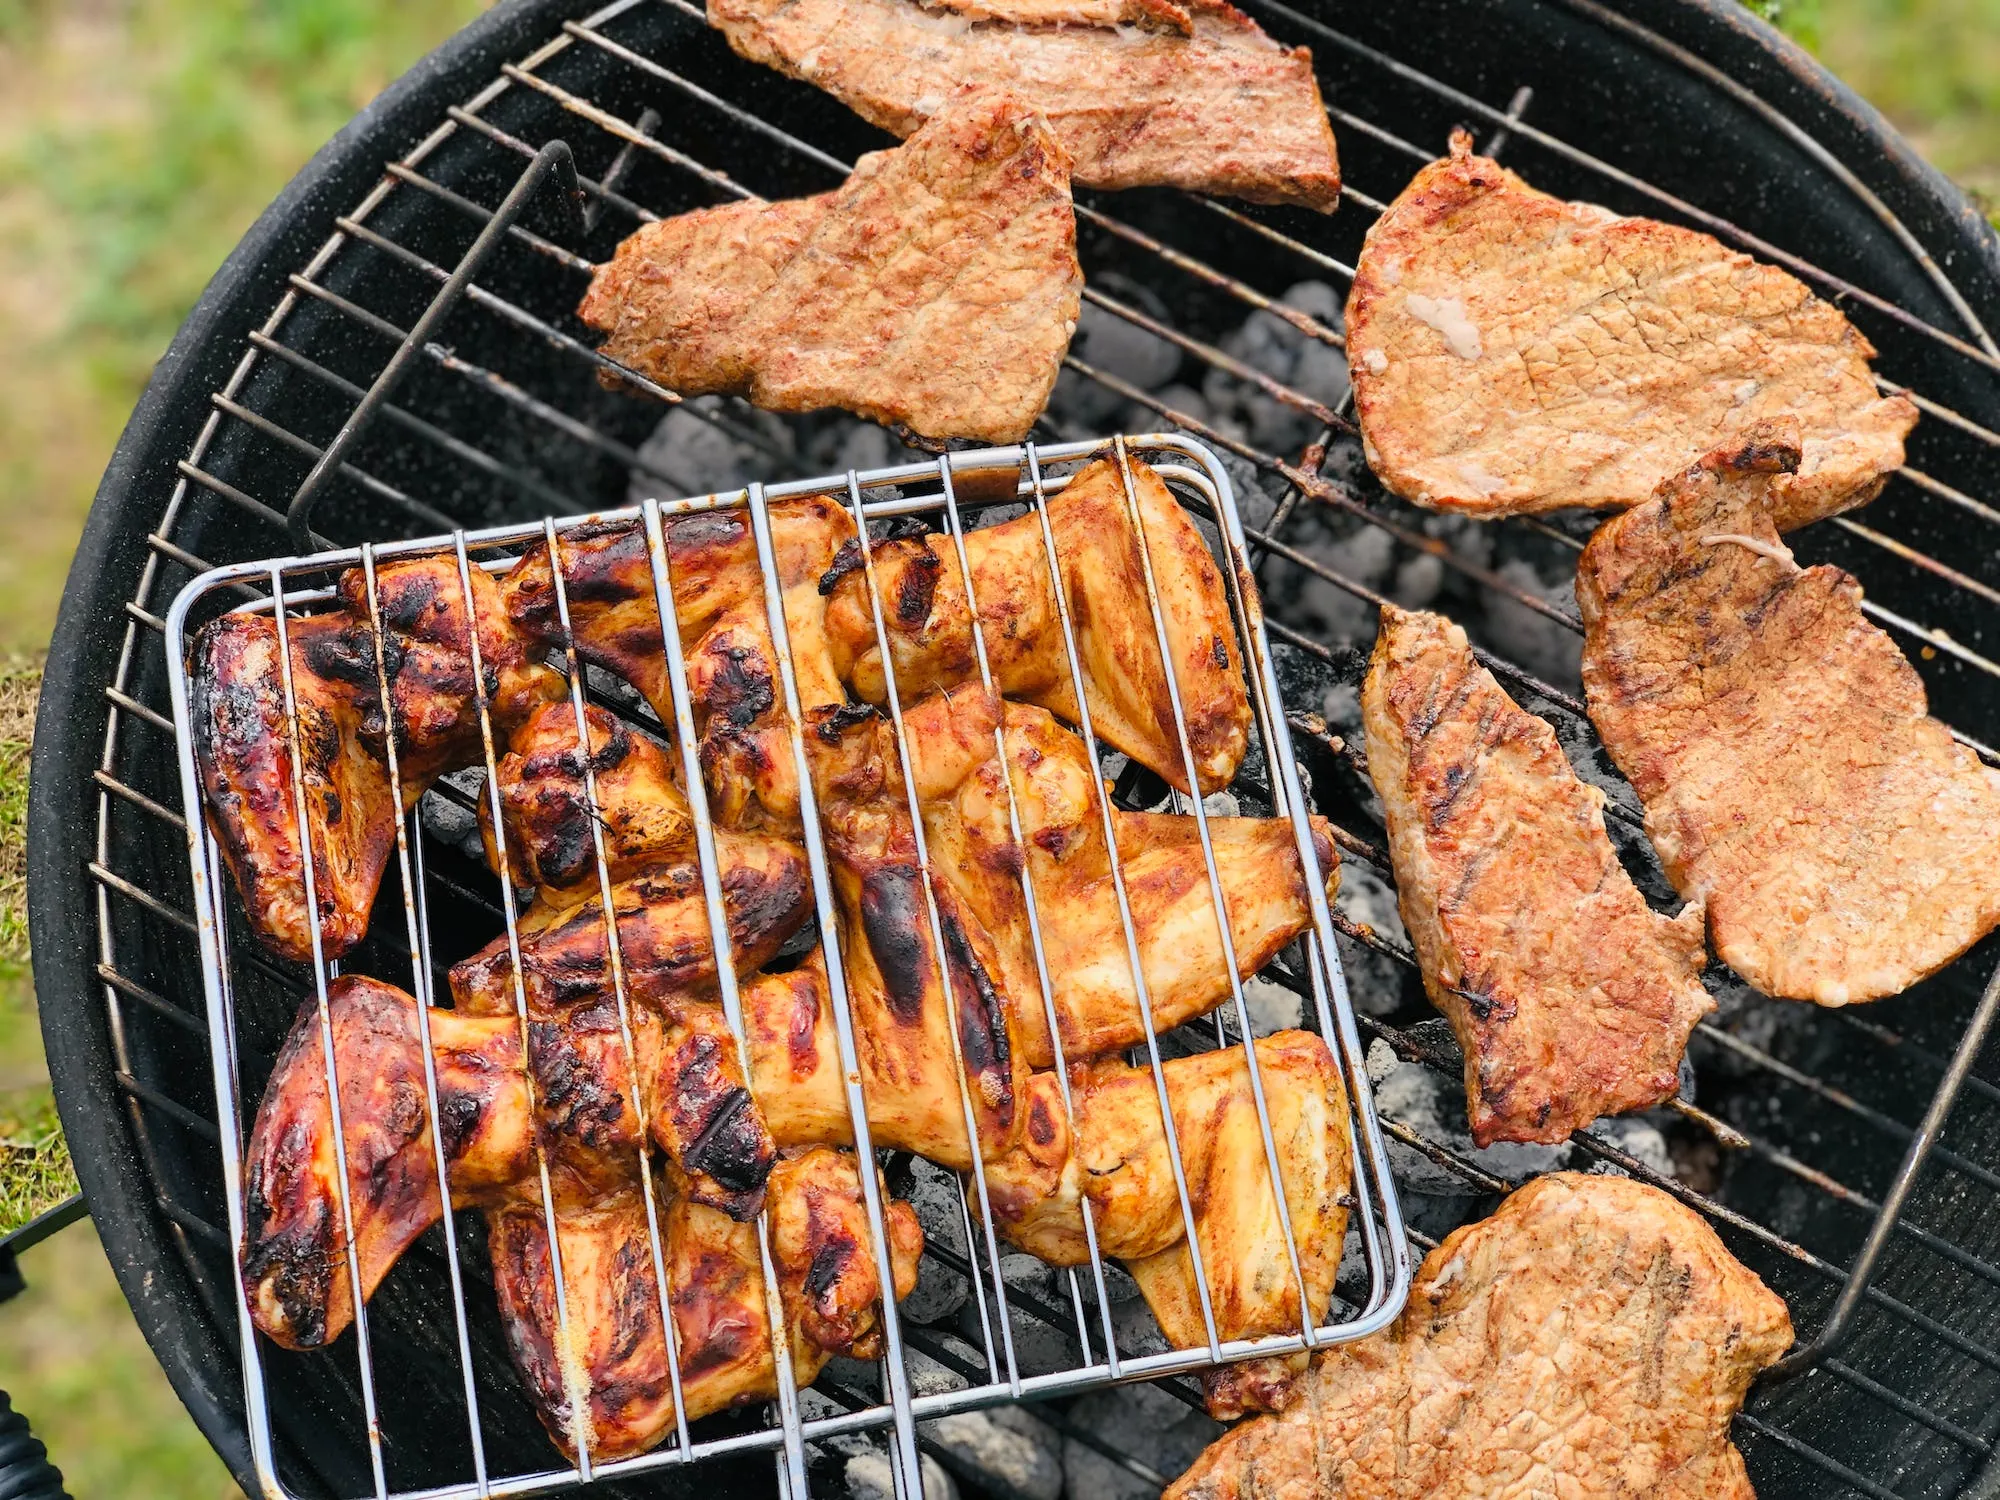 Best Pellet Grills with WiFi: Top Picks for Tech-Savvy Grilling